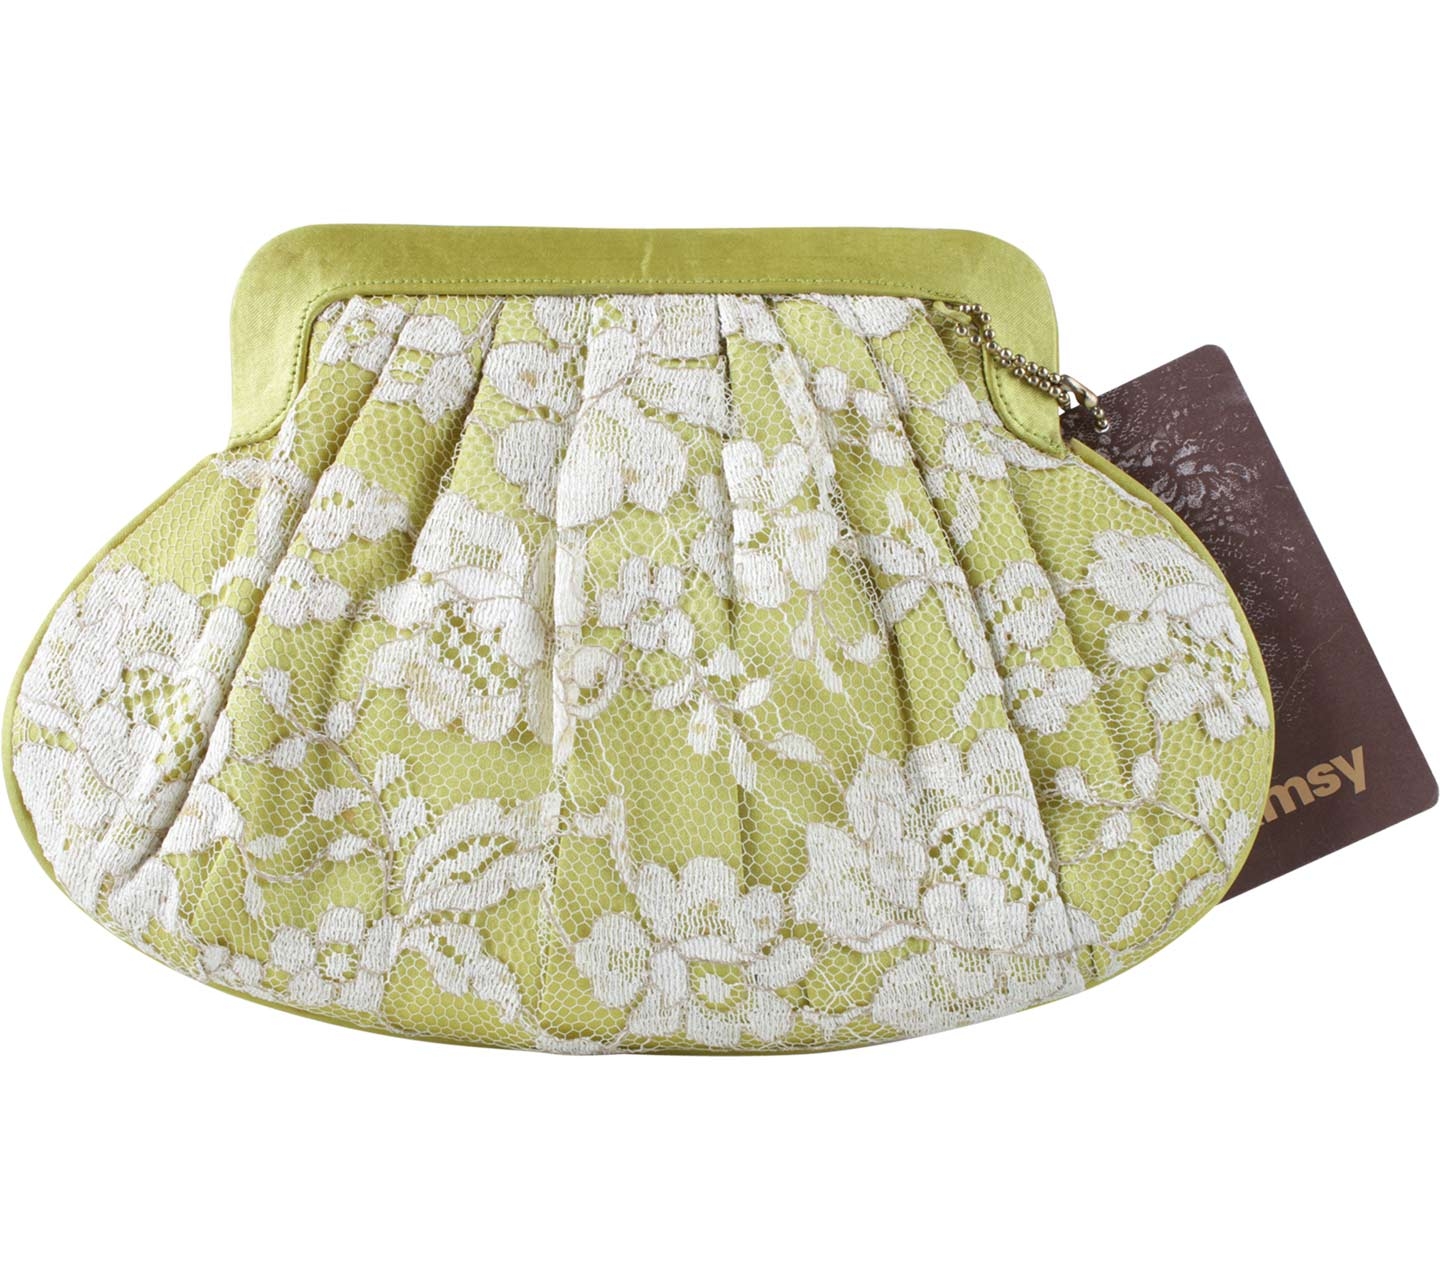 Mimsy Green Lace Clutch